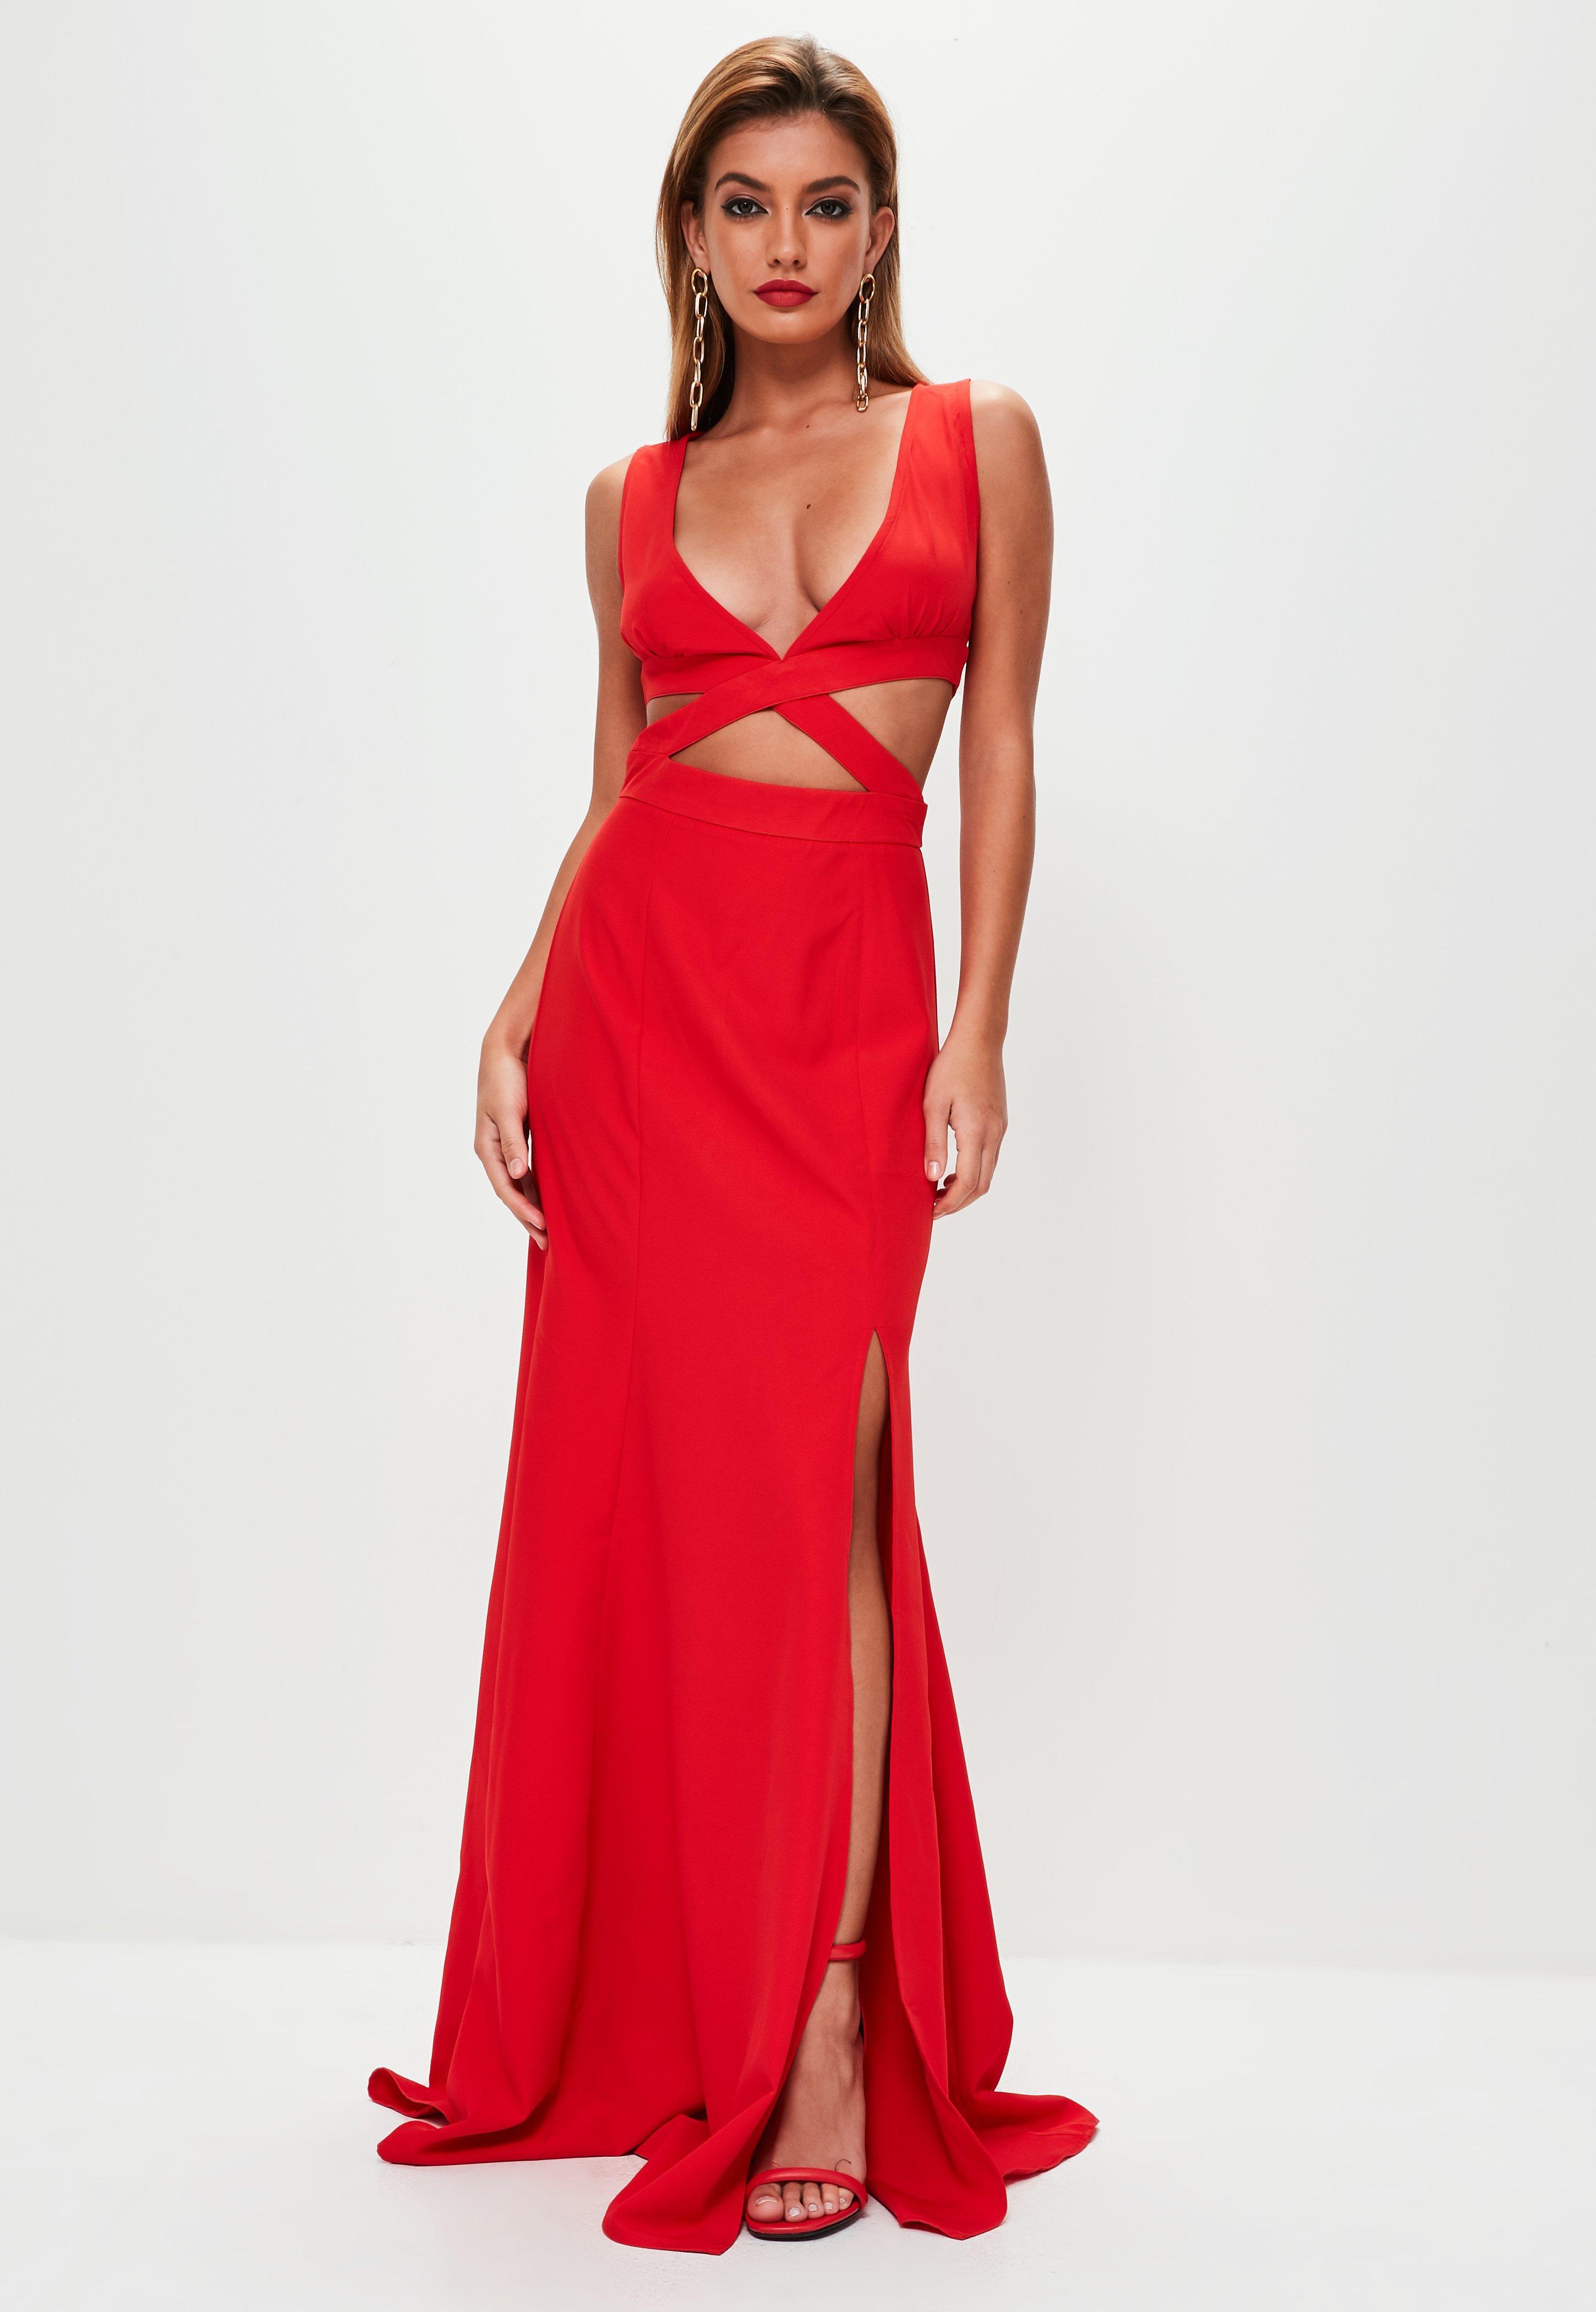 Lyst - Missguided Red Crepe Cut Out Waist Fishtail Maxi Dress in Red